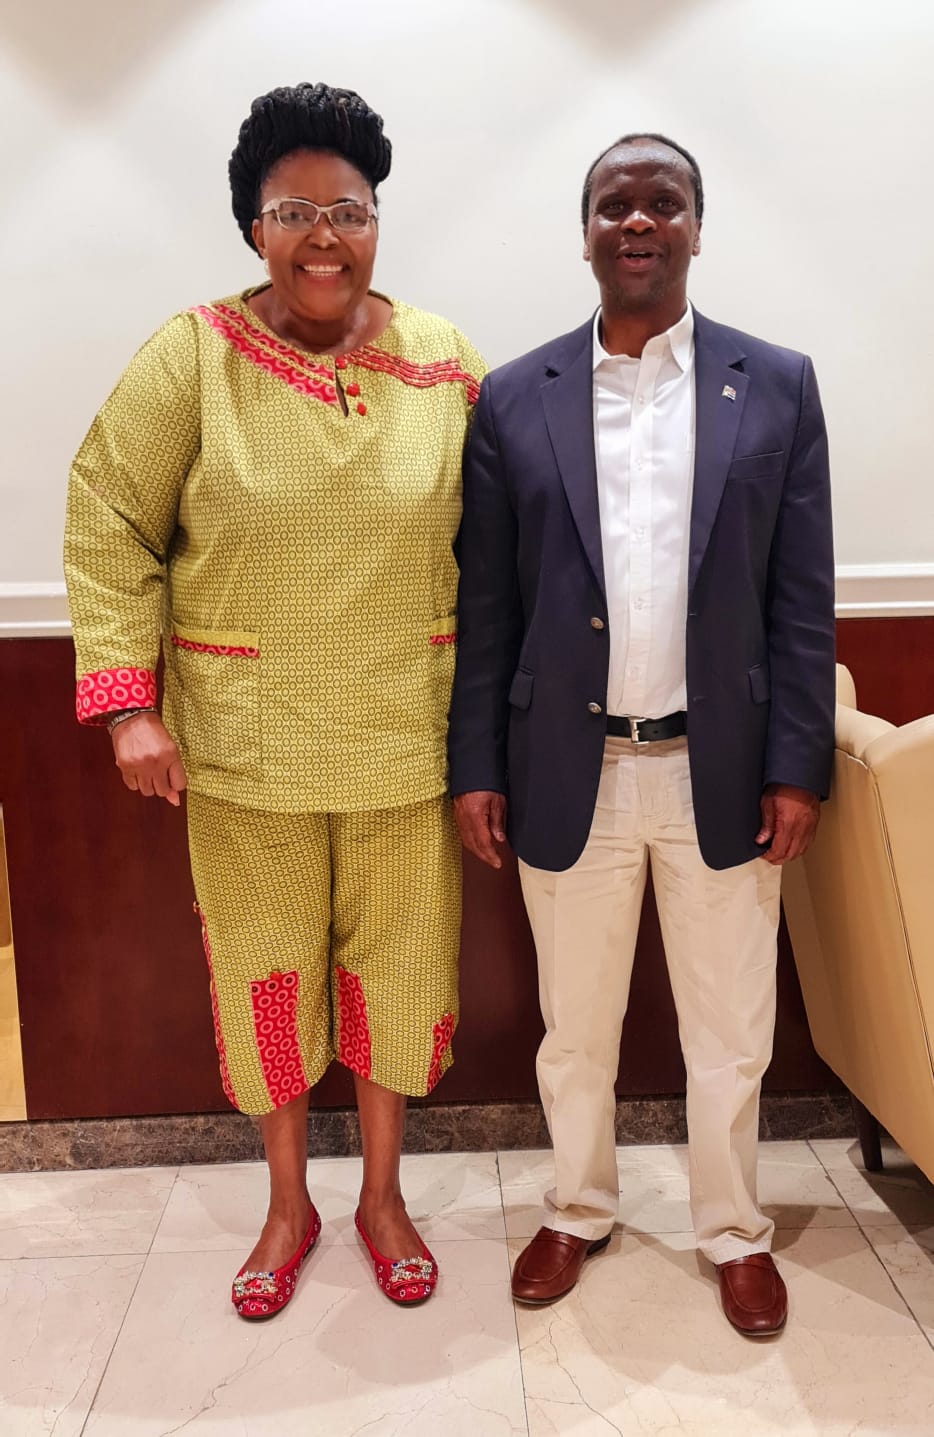 On_Sunday_30_January 2022_Ambassador_Makaya_during_a_courtesy_and_consultation_with Honourable_Ms_Pemmy_Majodina_the_Chief_Whip_of_the_National_Assembly_of the Republic_of_South_Africa_and_who_is_also_part_of_the_delegation_of_the_members_of_the_Pan_African_Parliament_Southern_Africa Caucus